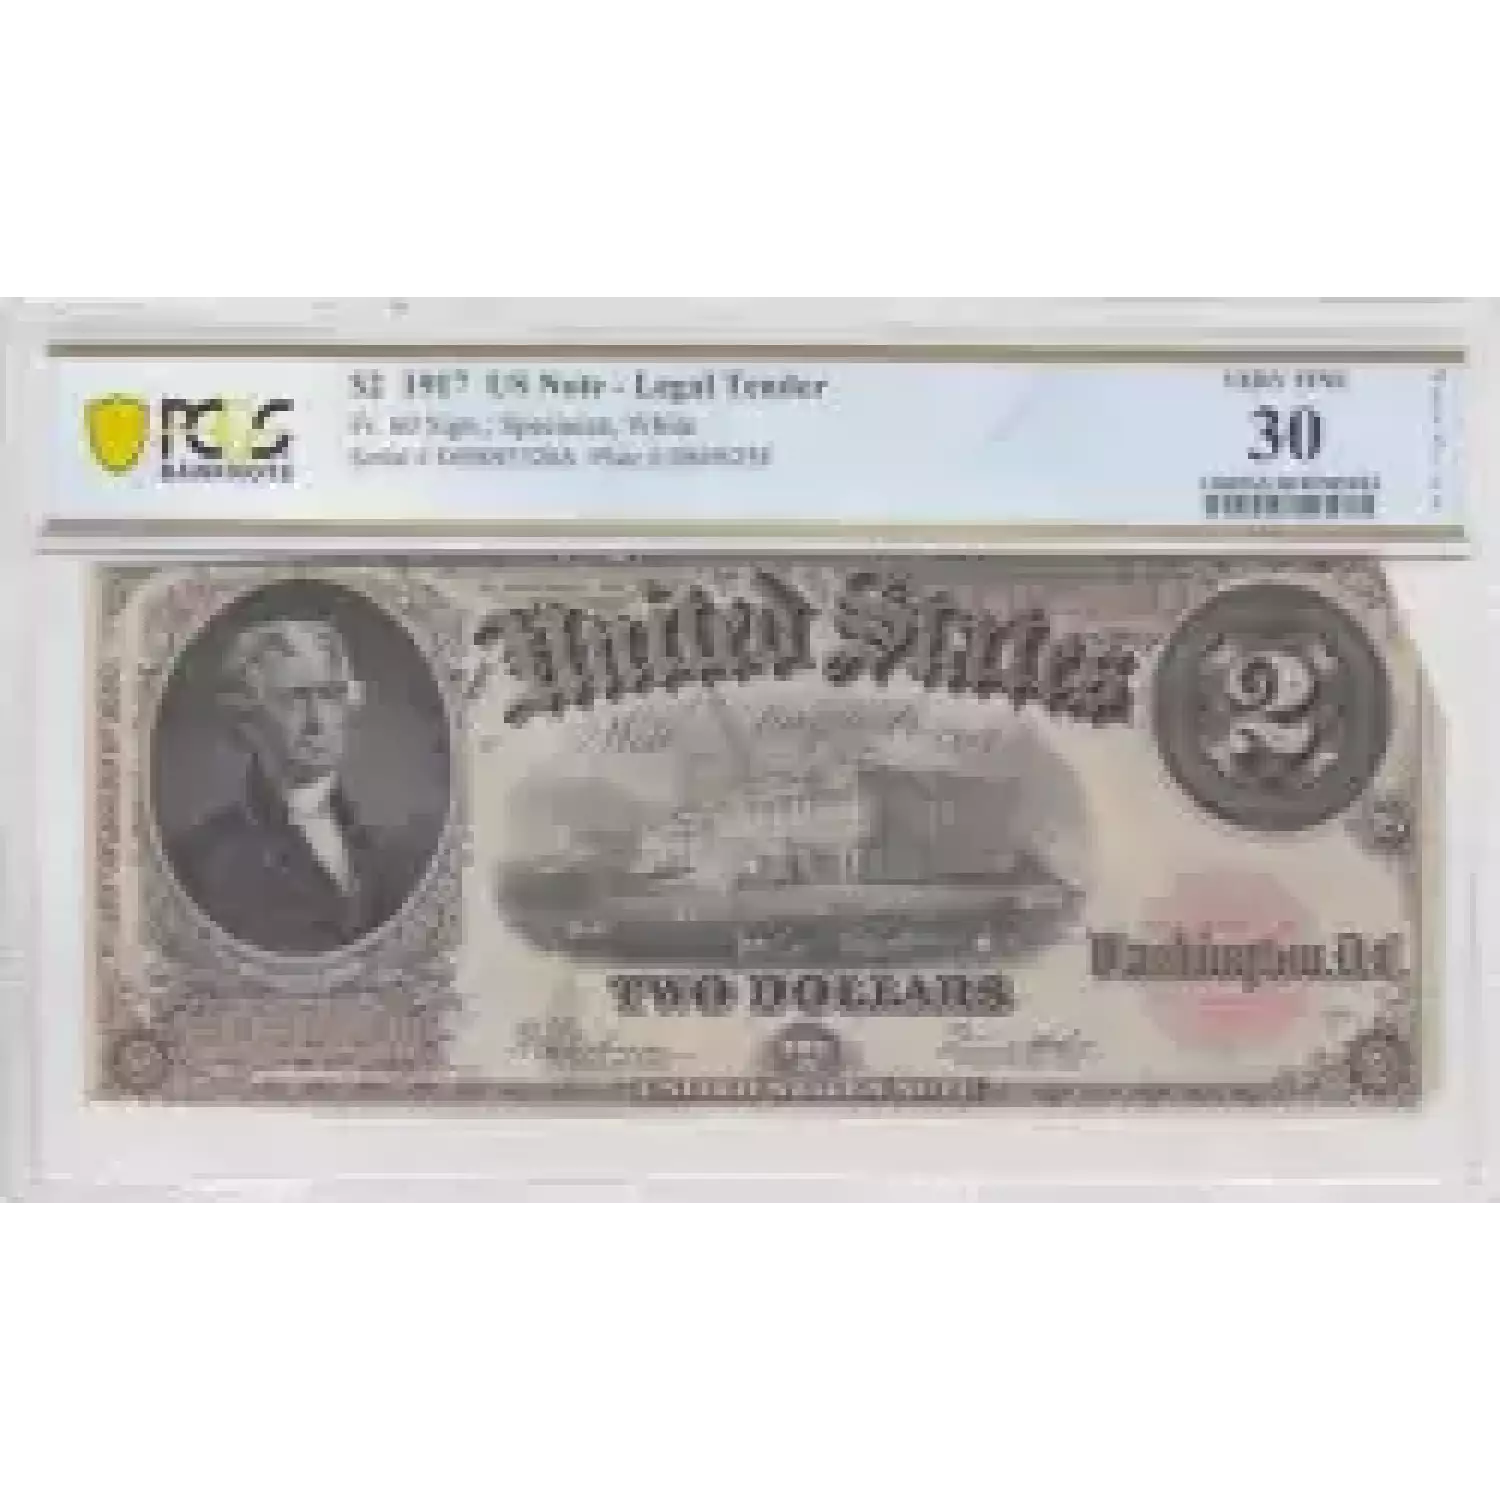 $2  Small Red, scalloped Legal Tender Issues 60 (3)